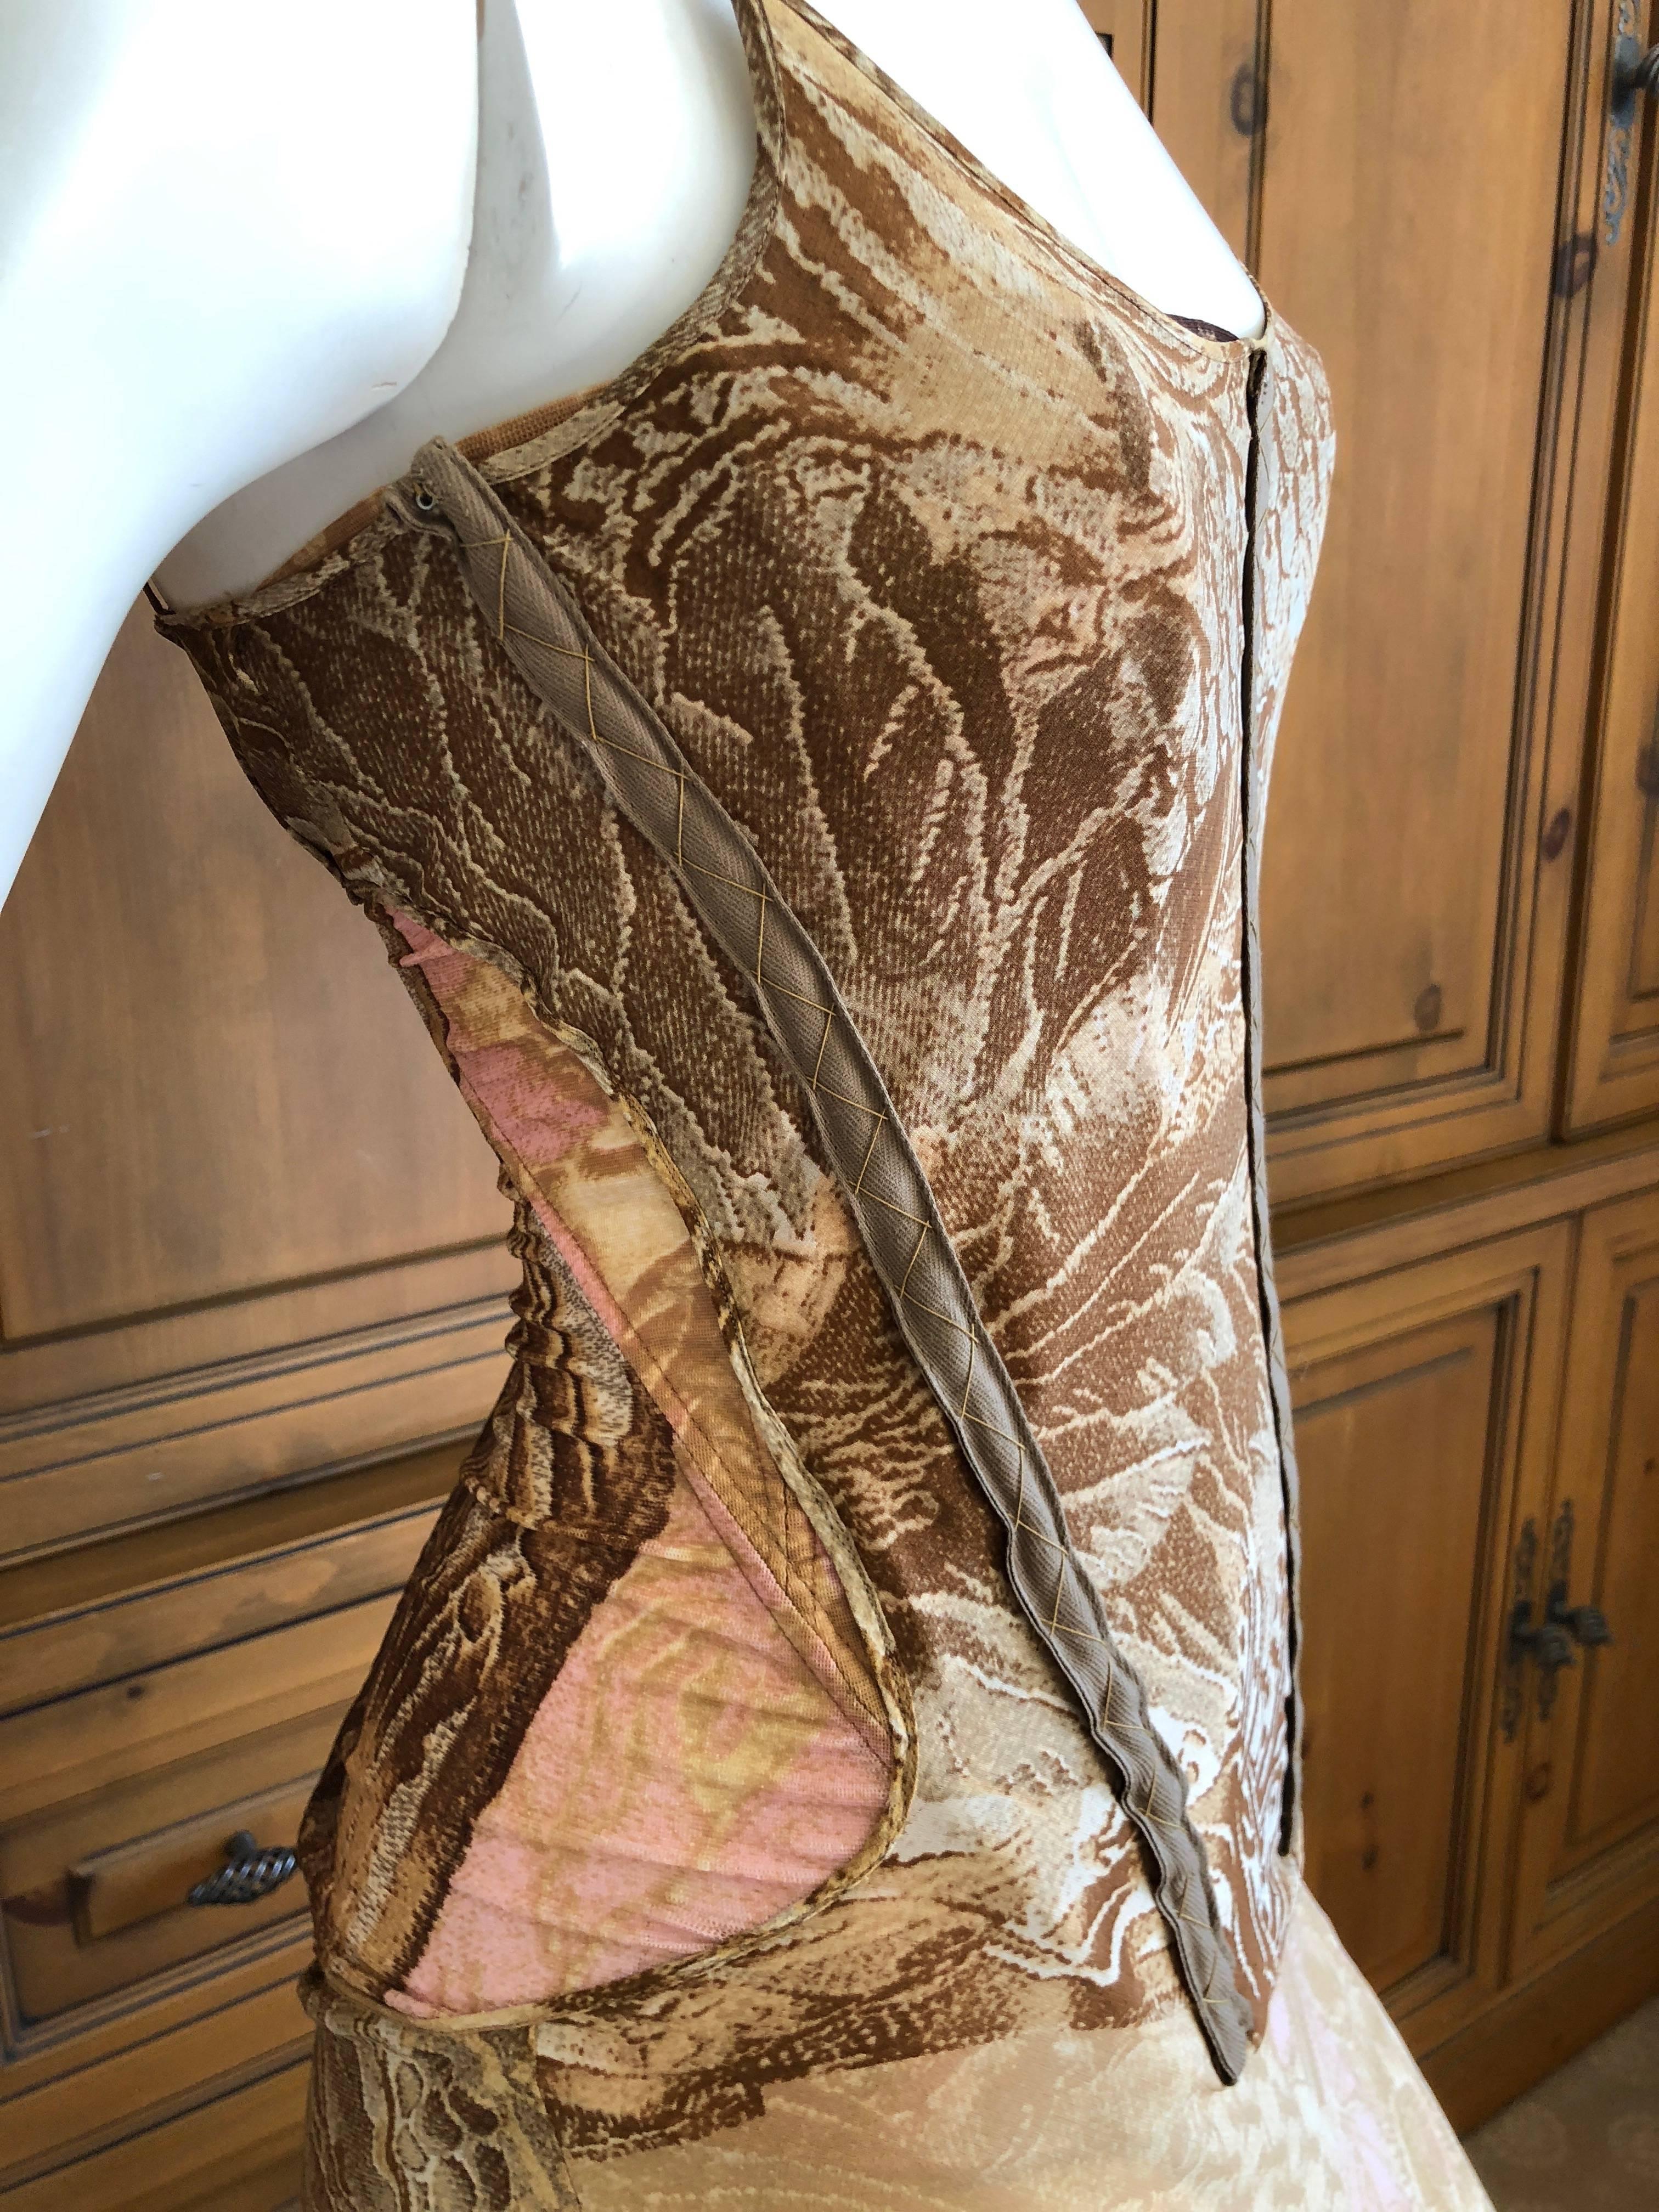 Roberto Cavalli Exceptional Gold Trim Silk Corseted Evening Dress with Full Train.

This is so pretty, and features a boned corset bodysuit, see photo, with an overdress with long train.

The edge of the hemline is raw, un hemmed and intentionally